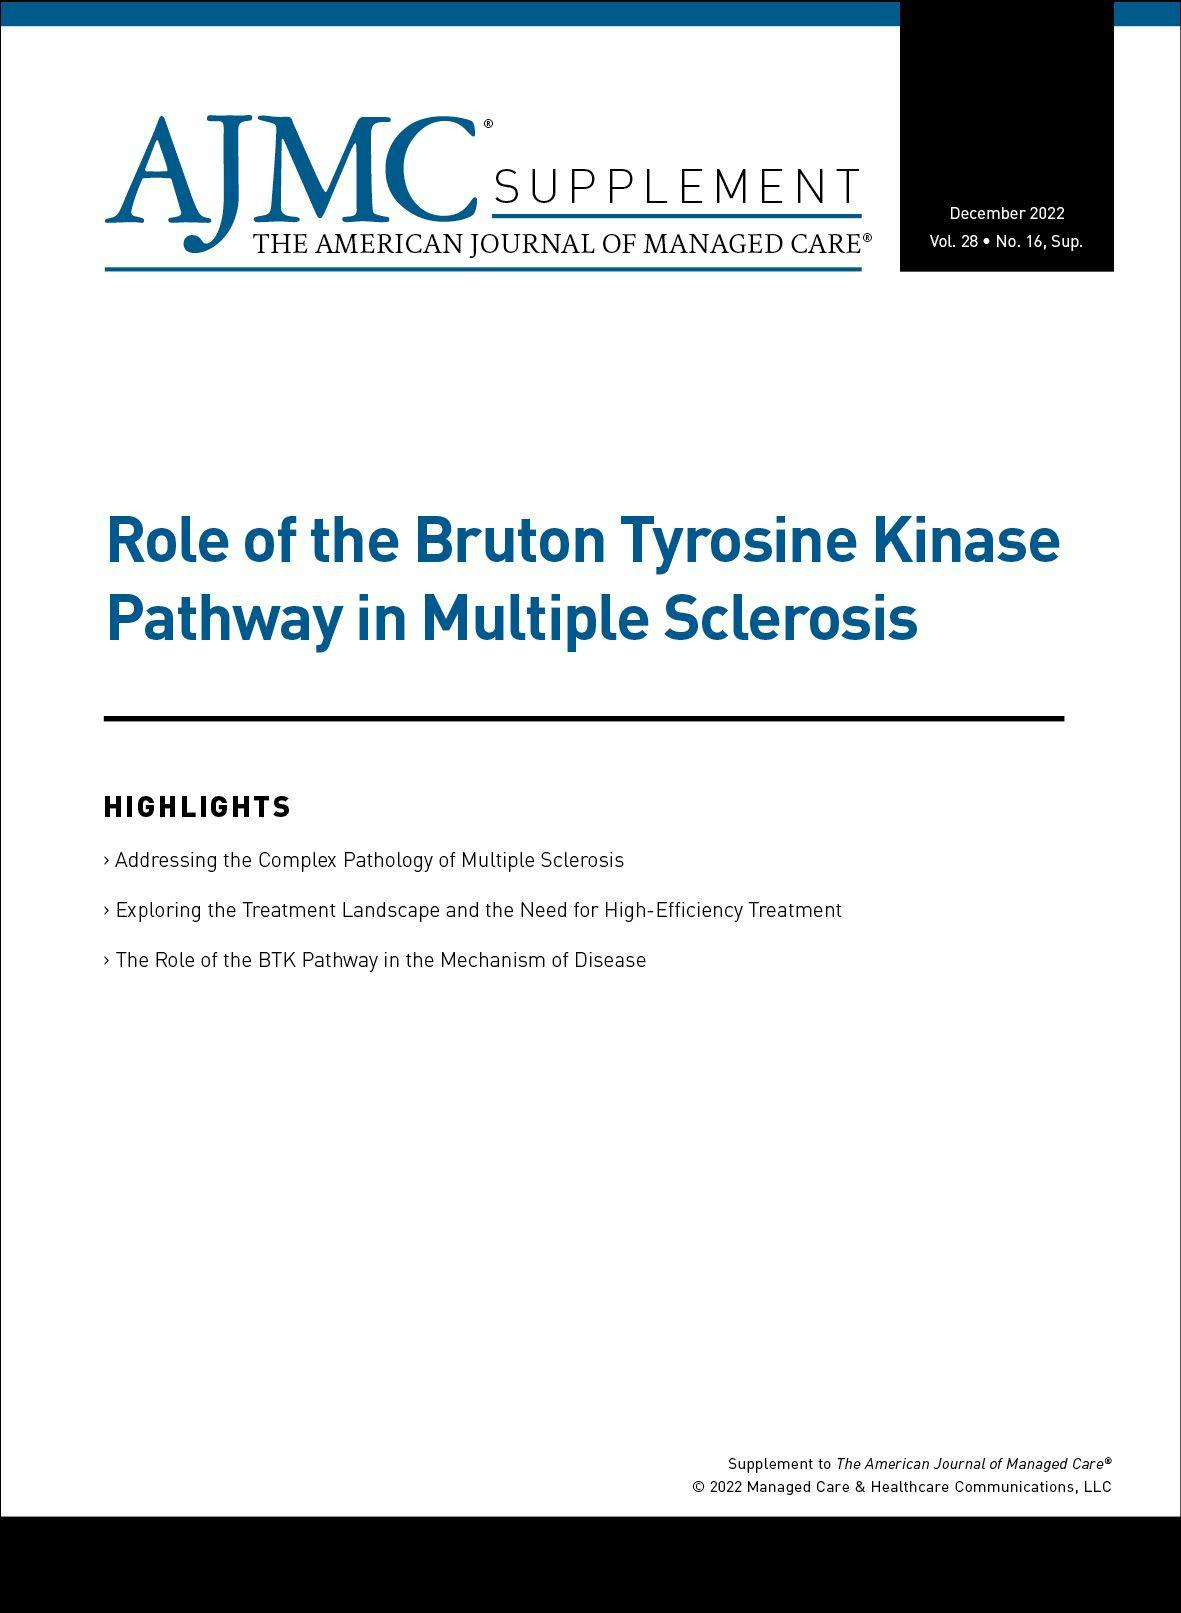 Role of the Bruton Tyrosine Kinase Pathway in Multiple Sclerosis